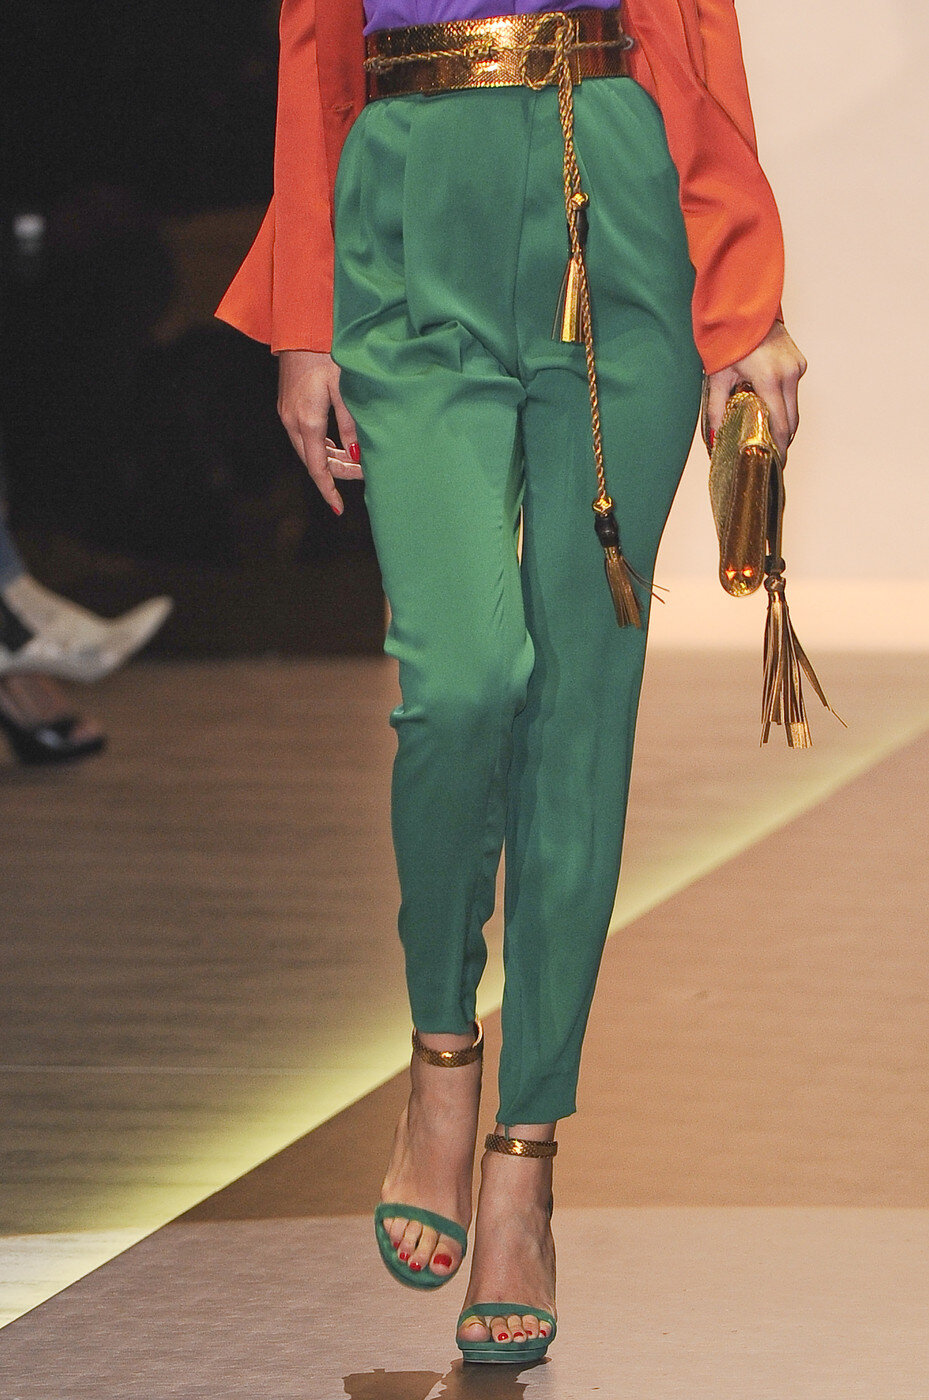 Gucci High-Waisted Tailored Trousers in Green.jpg